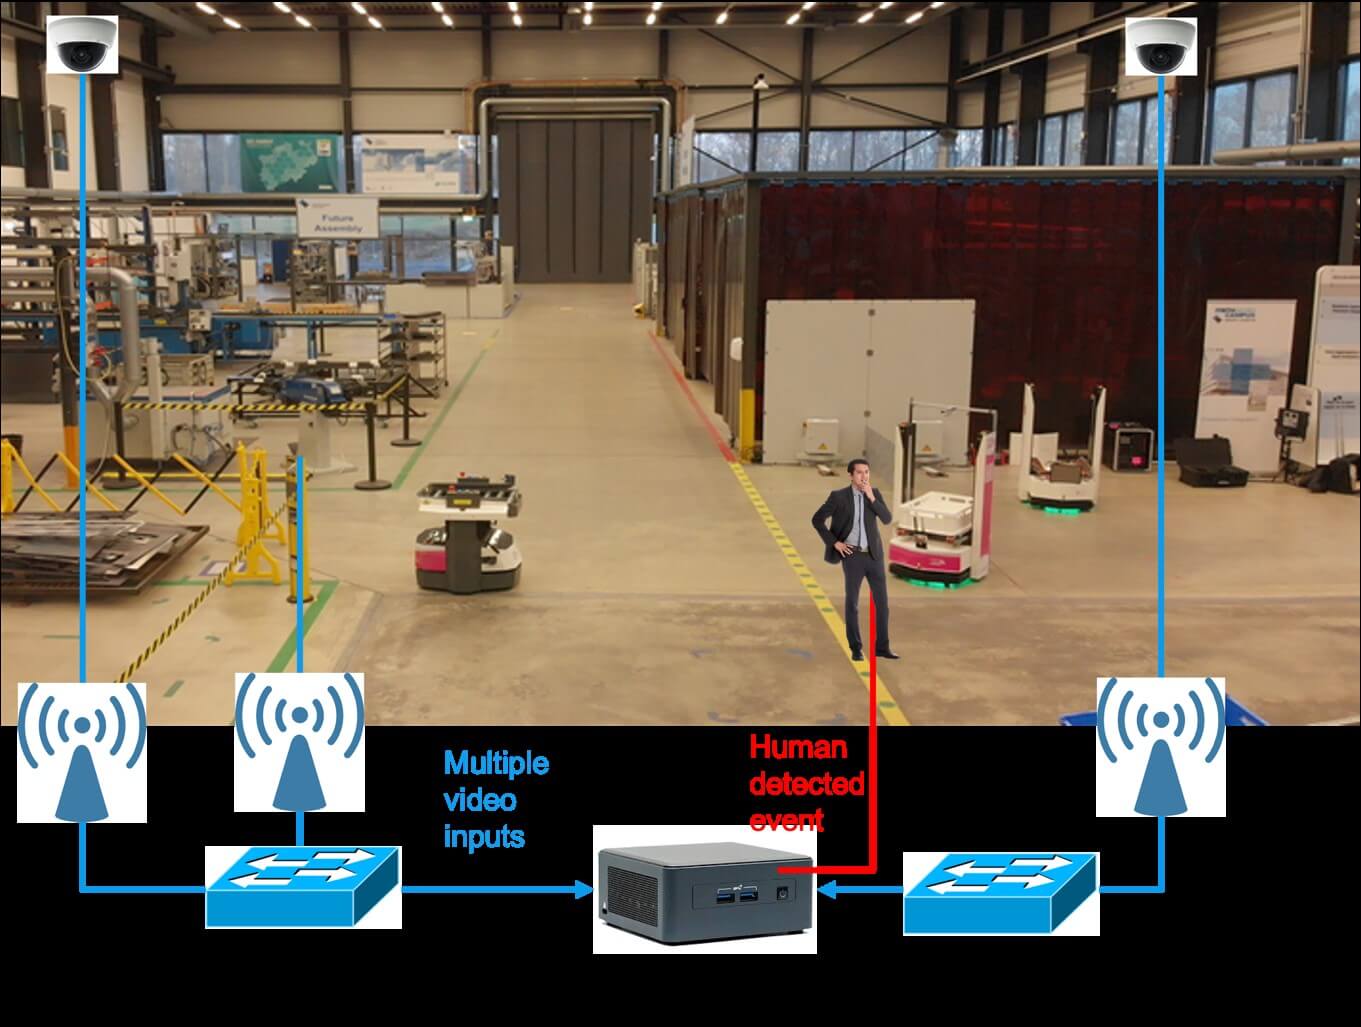 Wi-Fi 6 is well-positioned to support the provision of cost-effective enterprise-level connectivity in an industrial environment,